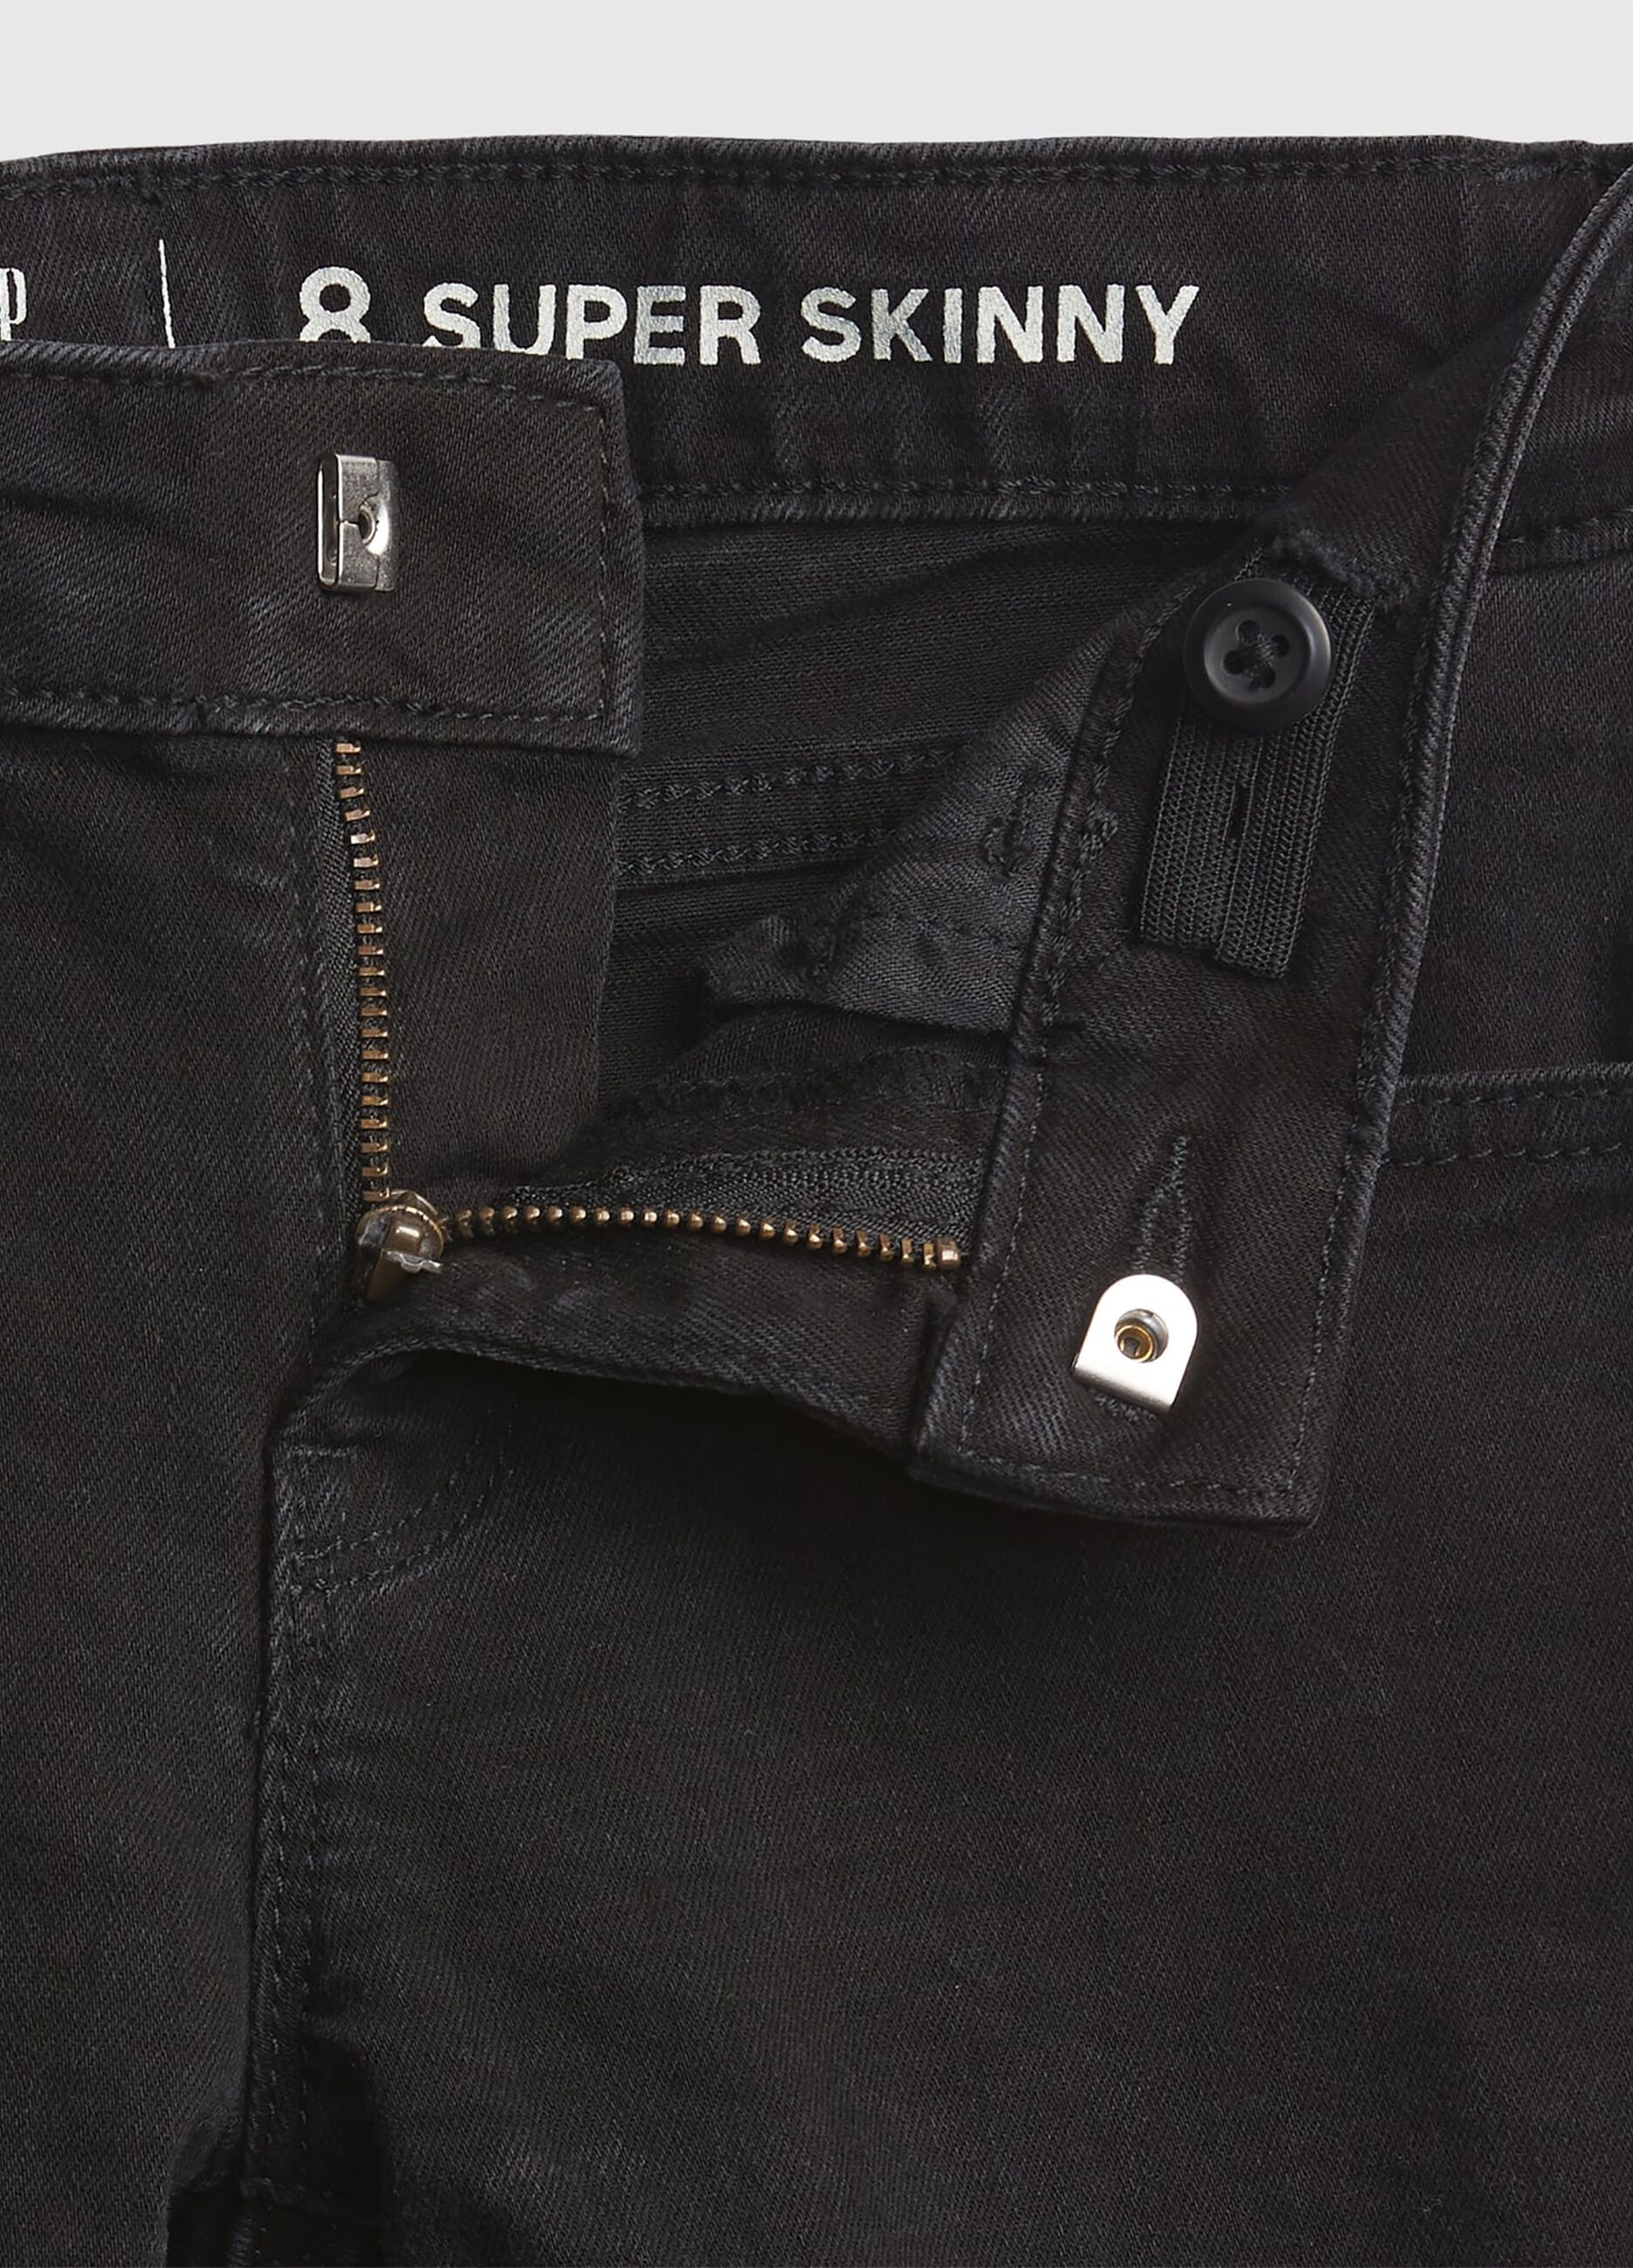 Super-skinny-fit jeans with five pockets